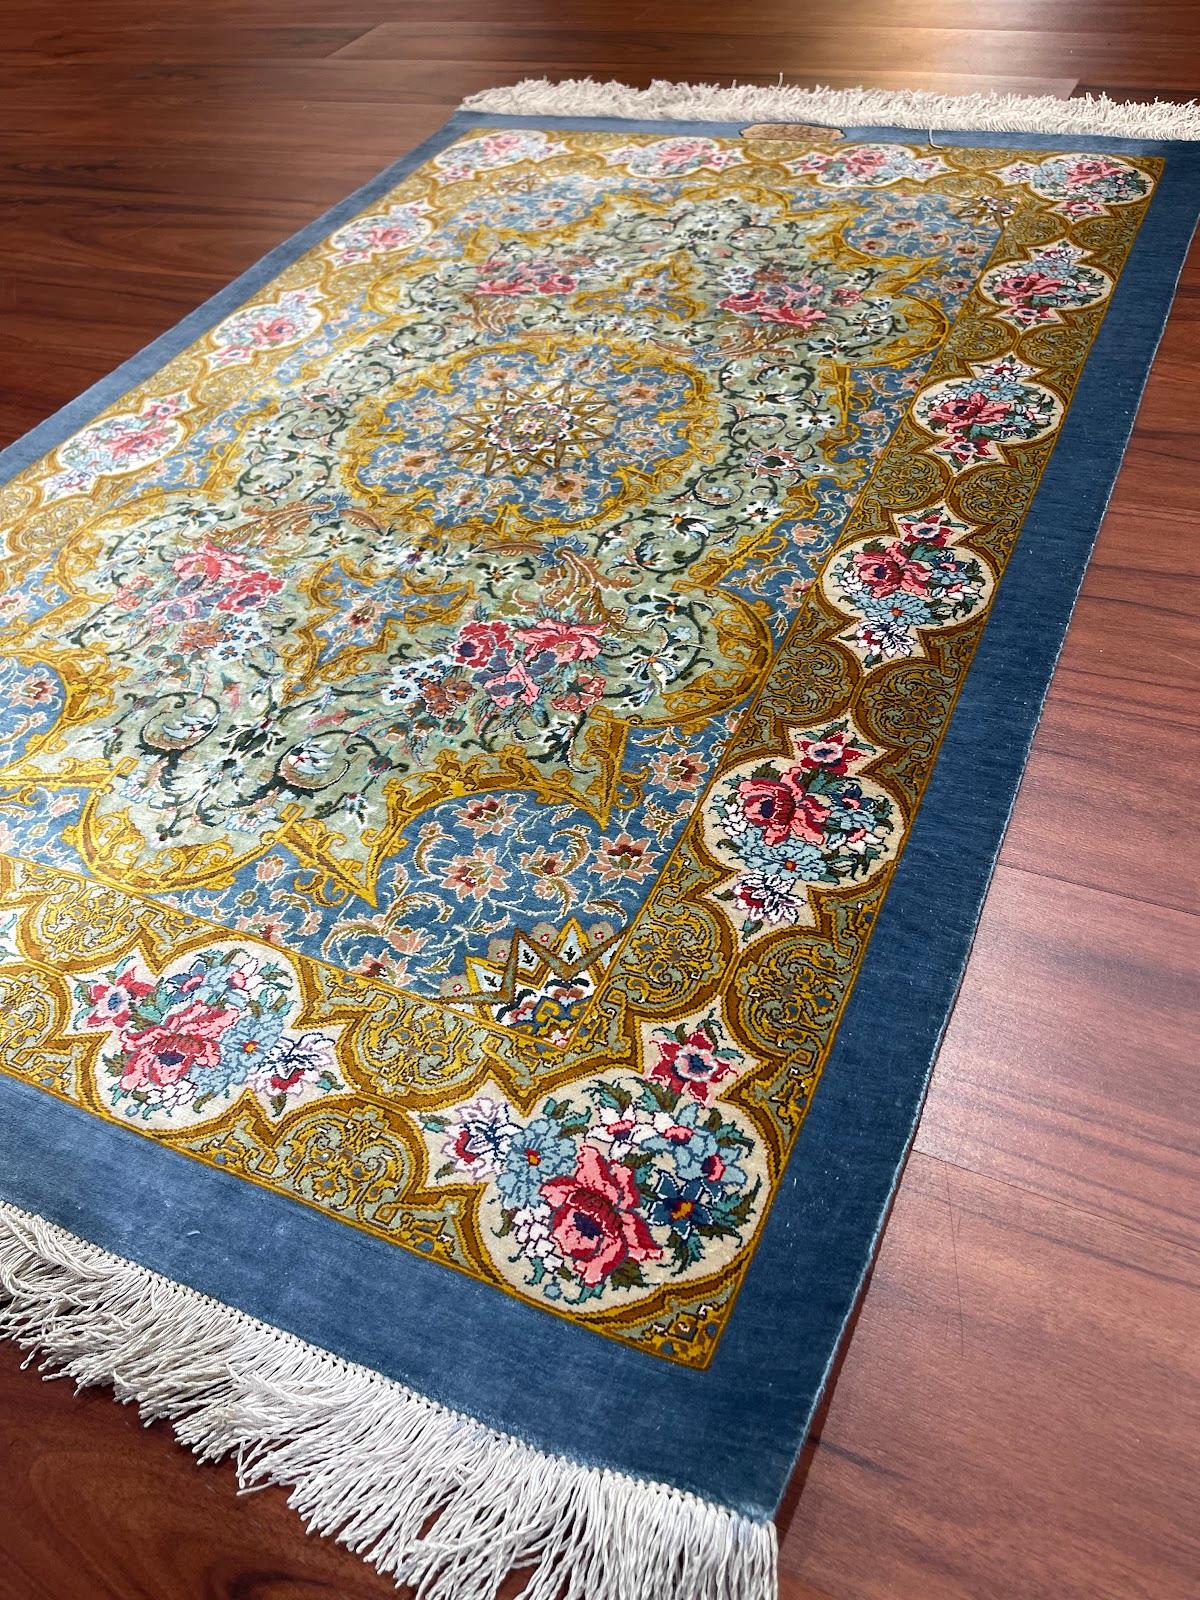 This is a Persian Silk Qum rug originated from iran. The Material is 100% silk. The Dimensions are 2’7”X 3’11” ft. Condition of the item is purely Excellent. Circa (Date of manufacture) 20th century. Feel free to message me regarding this listing or